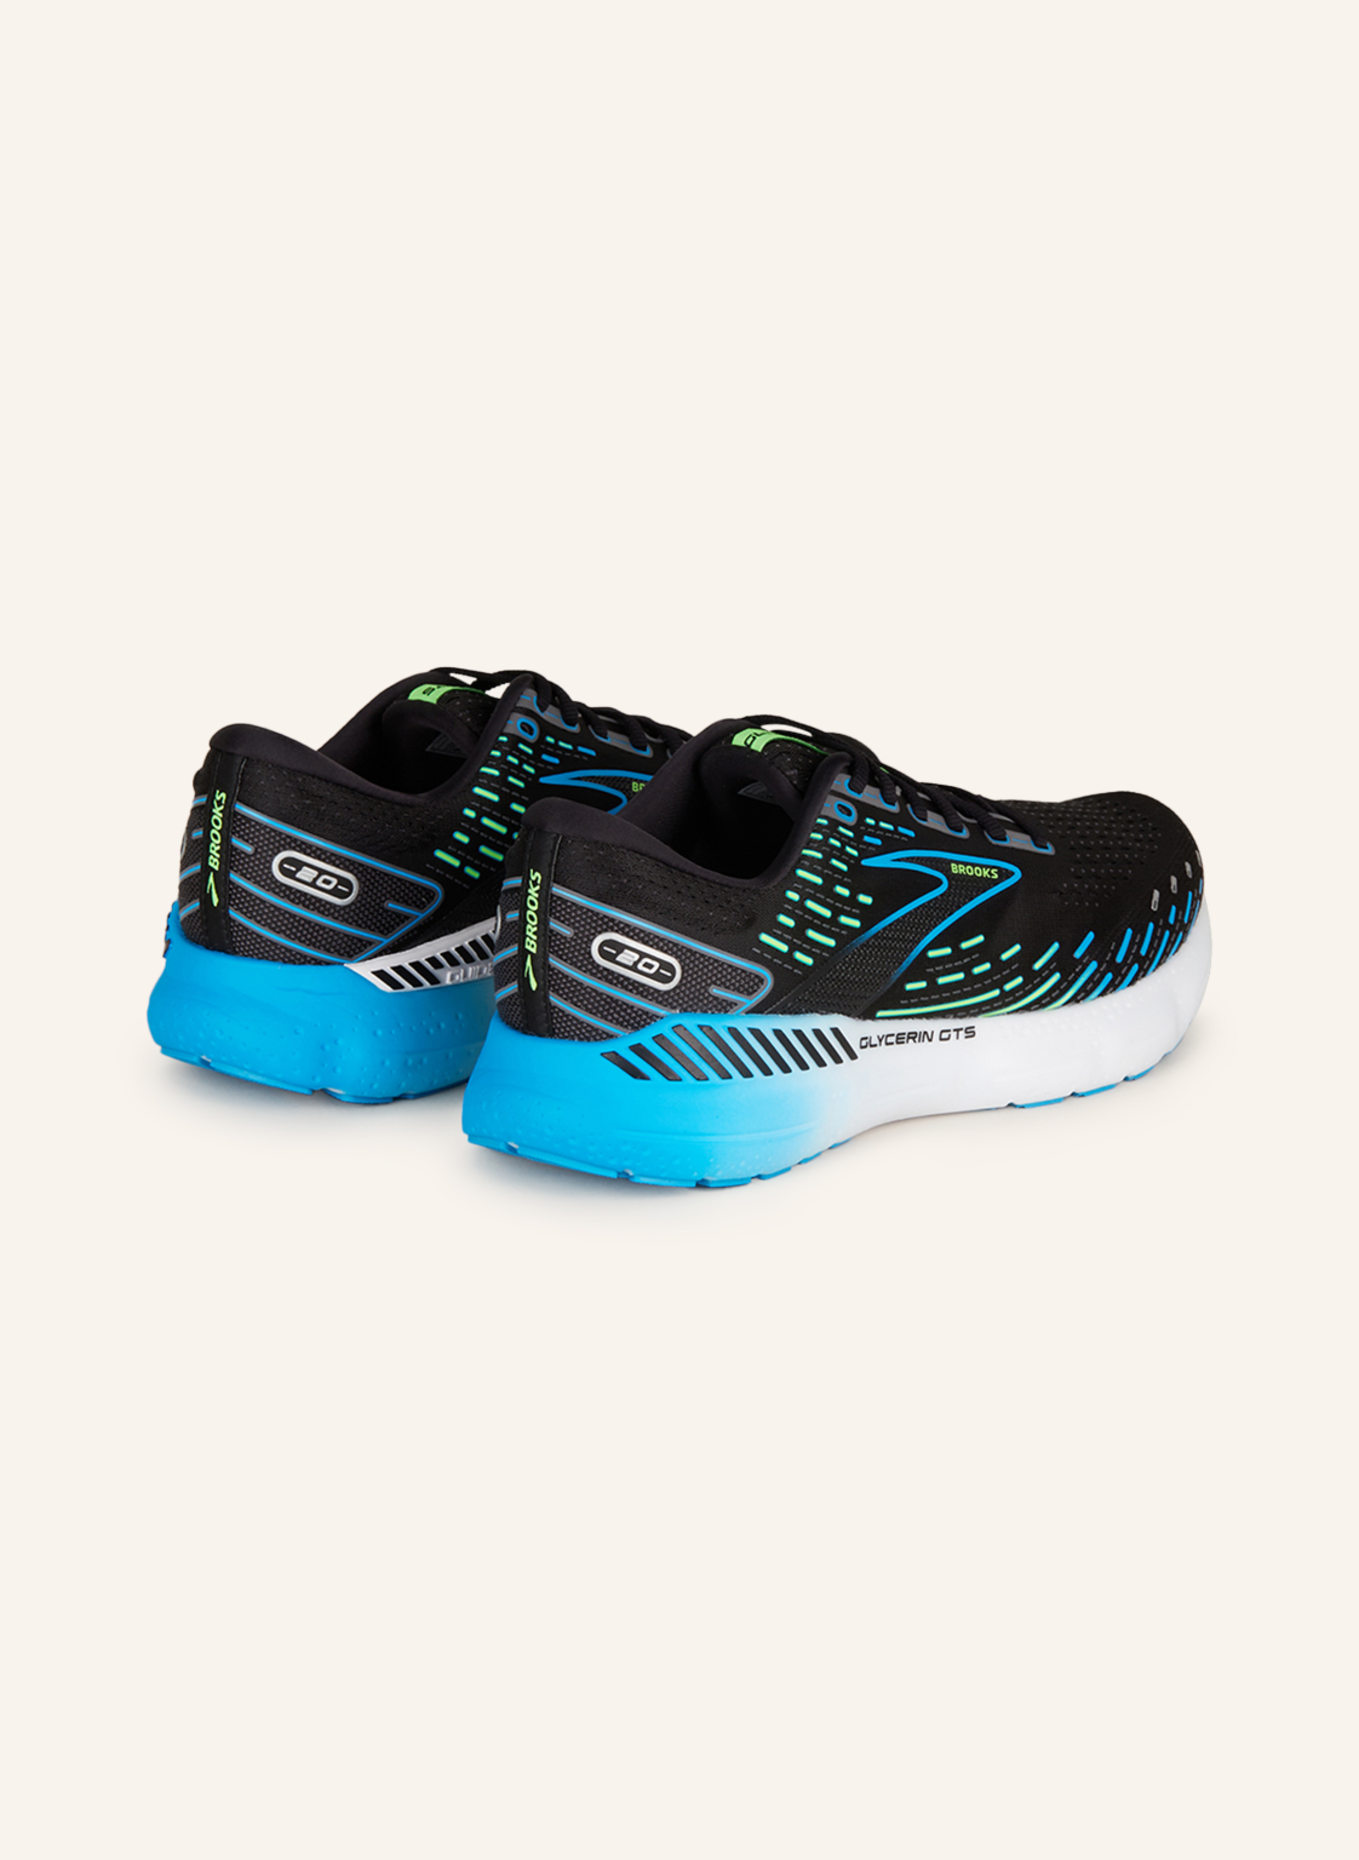 BROOKS Running shoes GLYCERIN GTS 20, Color: BLACK/ NEON BLUE (Image 2)